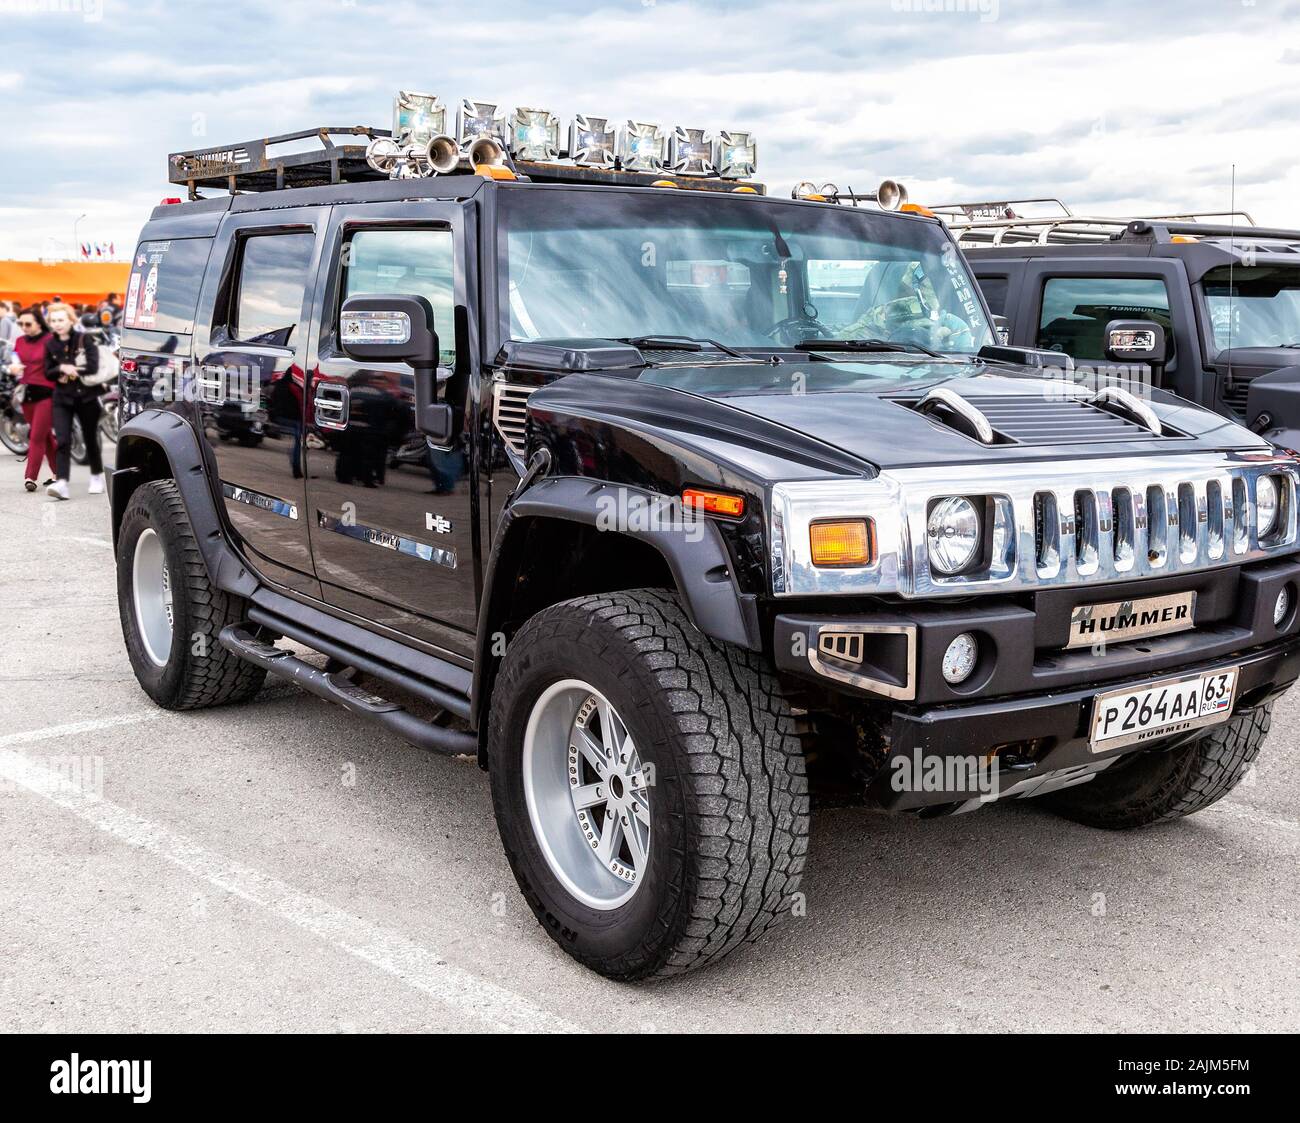 Hummer Car High Resolution Stock Photography and Images - Alamy